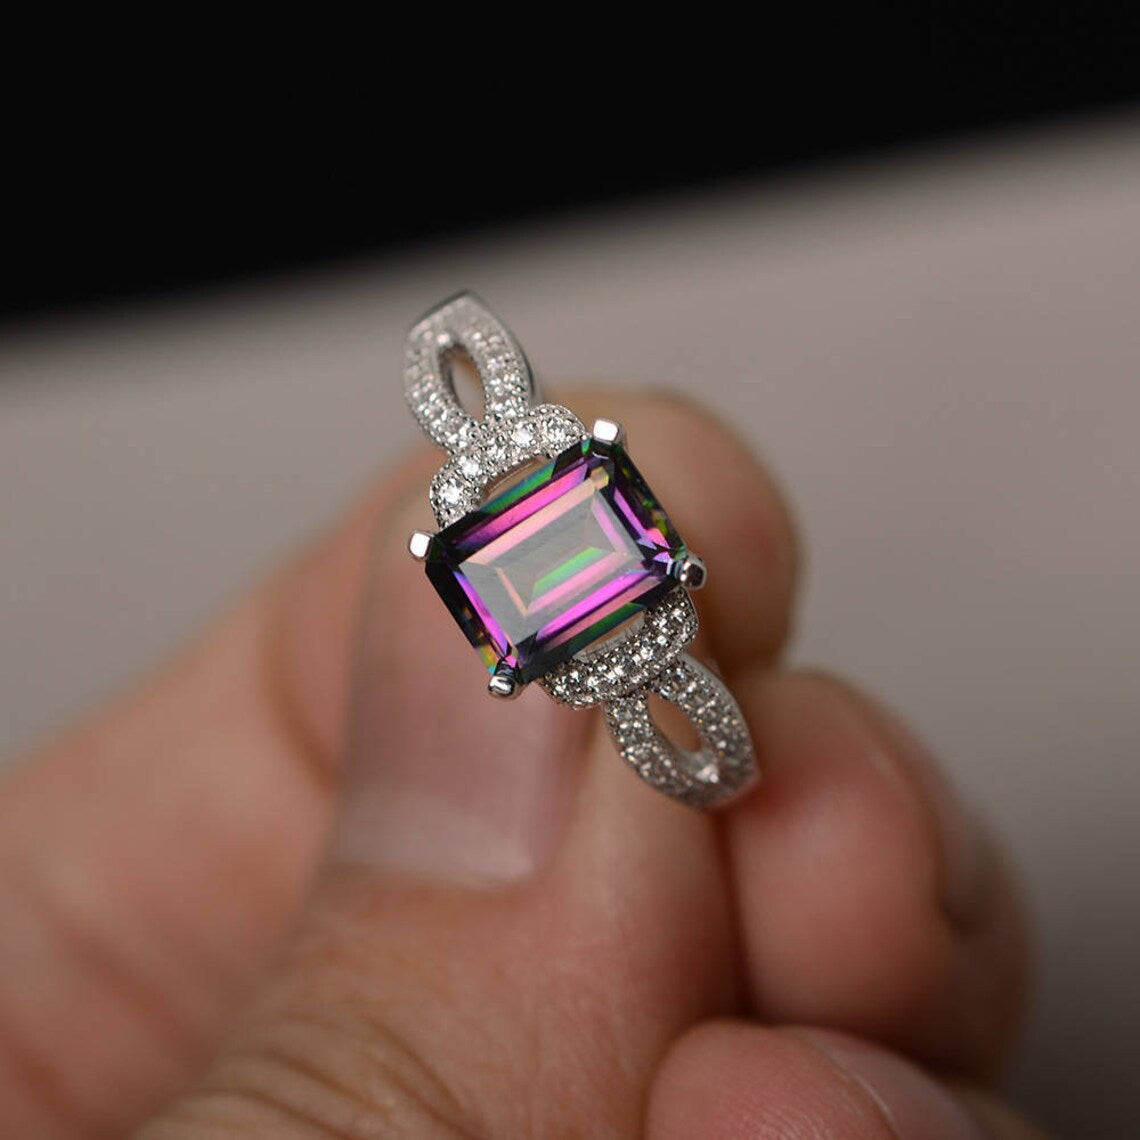 Mystic Topaz Emerald Cut Engagement Rings For Women - 925 Solid Sterling Silver Ring